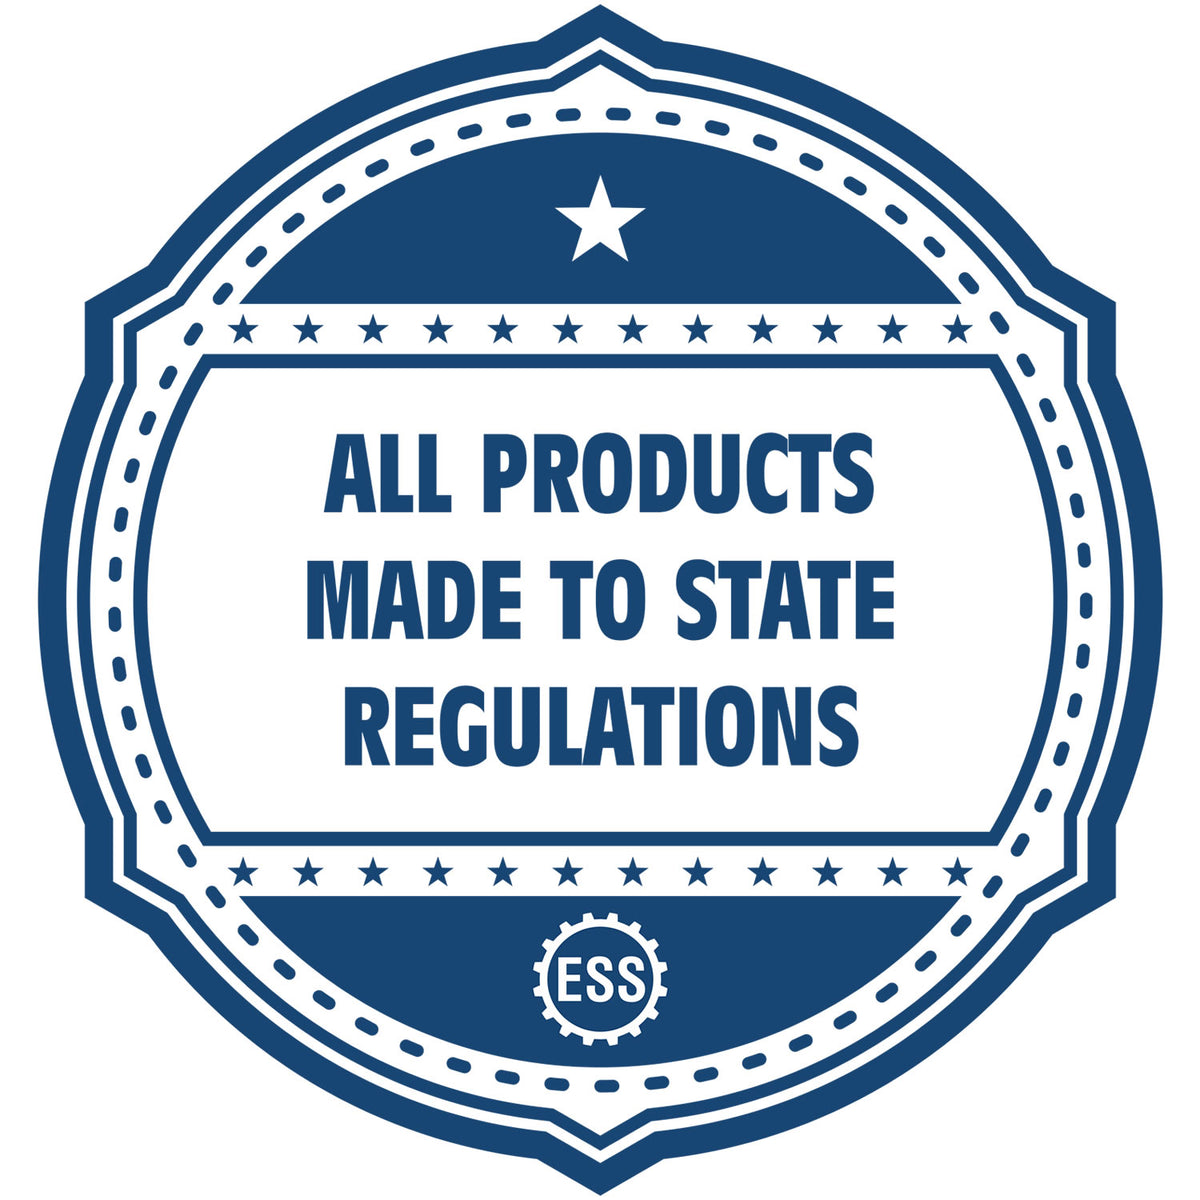 An icon or badge element for the Extended Long Reach New Mexico Architect Seal Embosser showing that this product is made in compliance with state regulations.